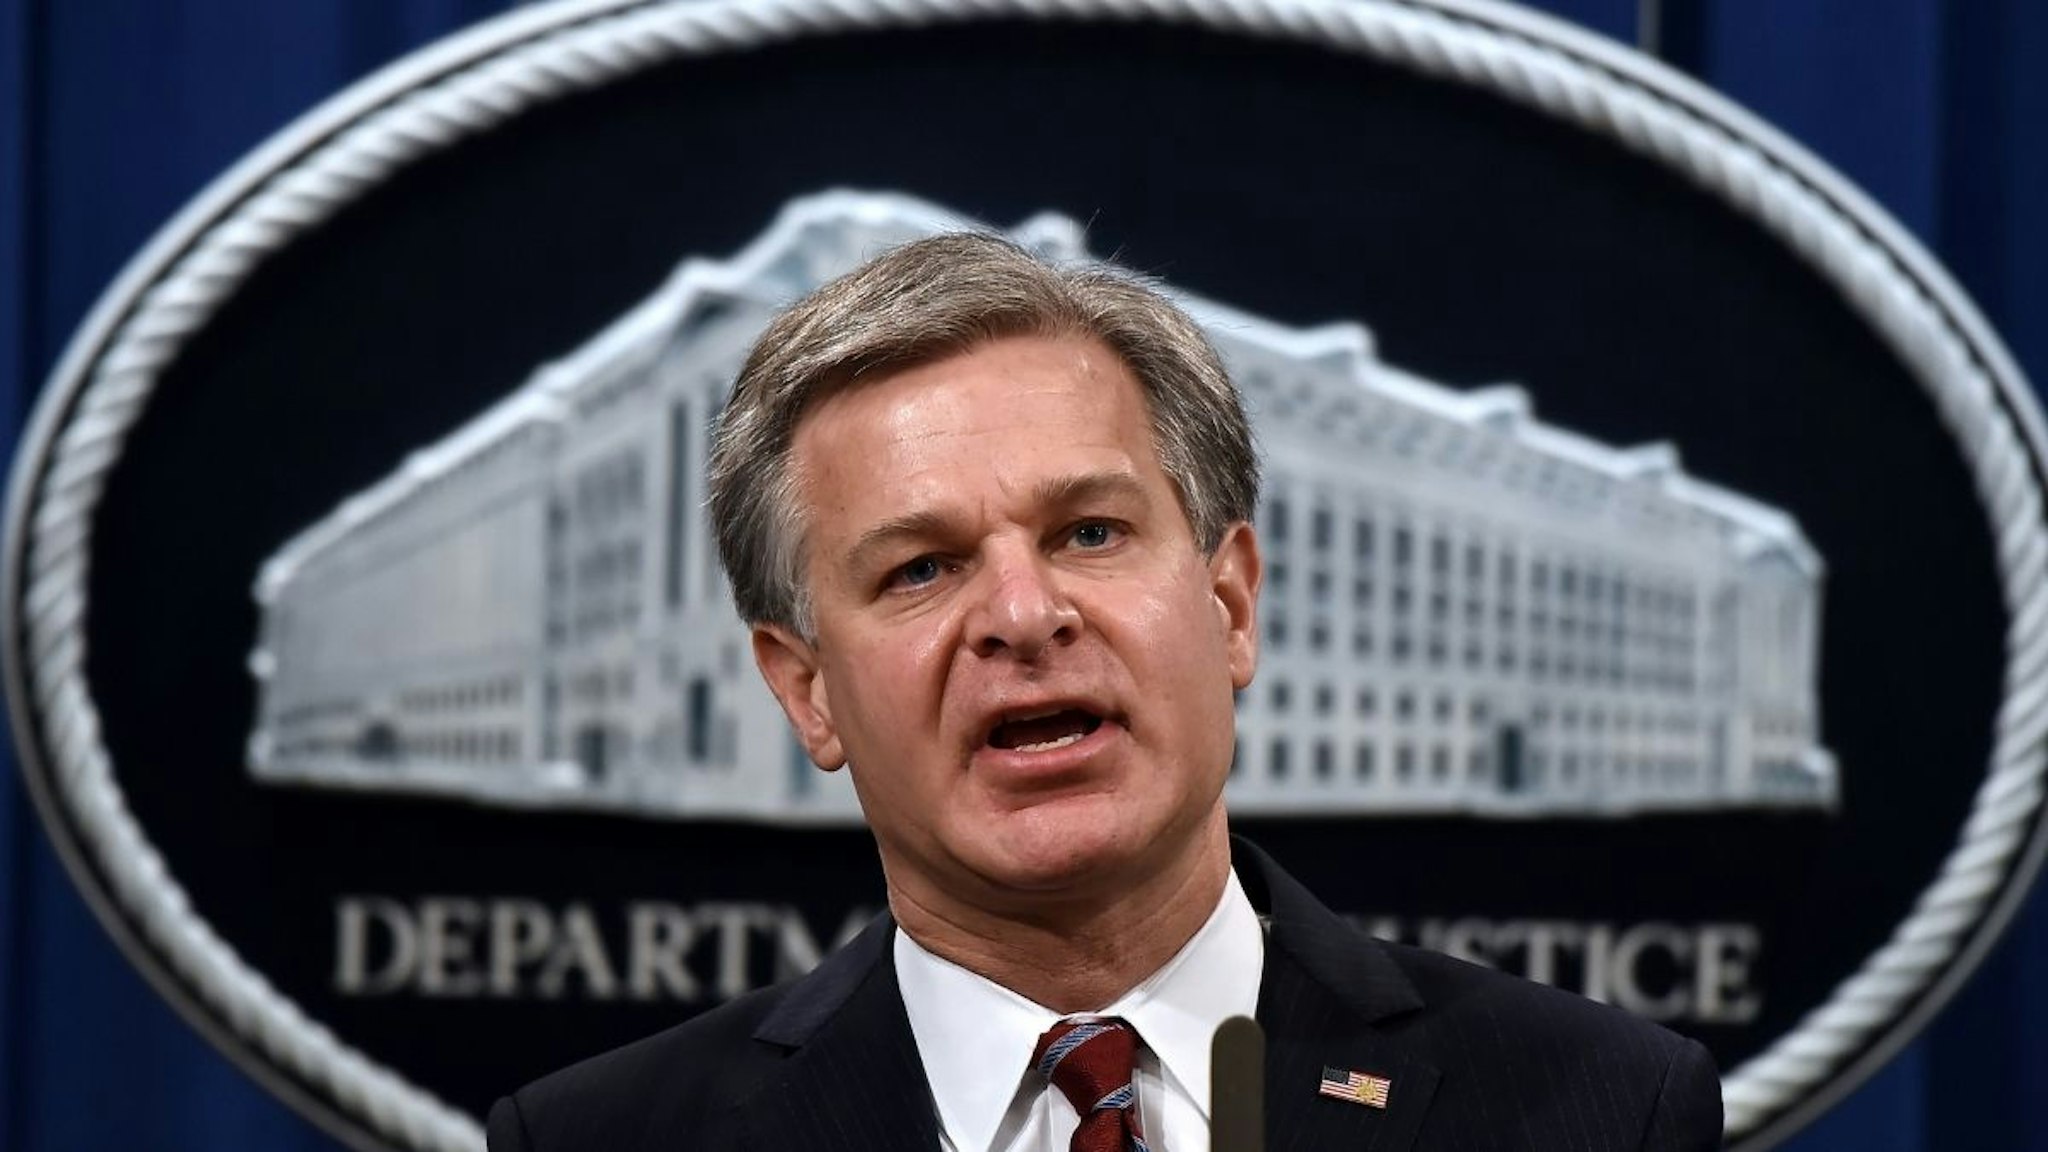 Federal Bureau of Investigation Director Christopher Wray announces significant law enforcement actions related to the illegal sale of drugs and other illicit goods and services on the Darknet during a press conference at the Department of Justice September 22, 2020 in Washington, DC.